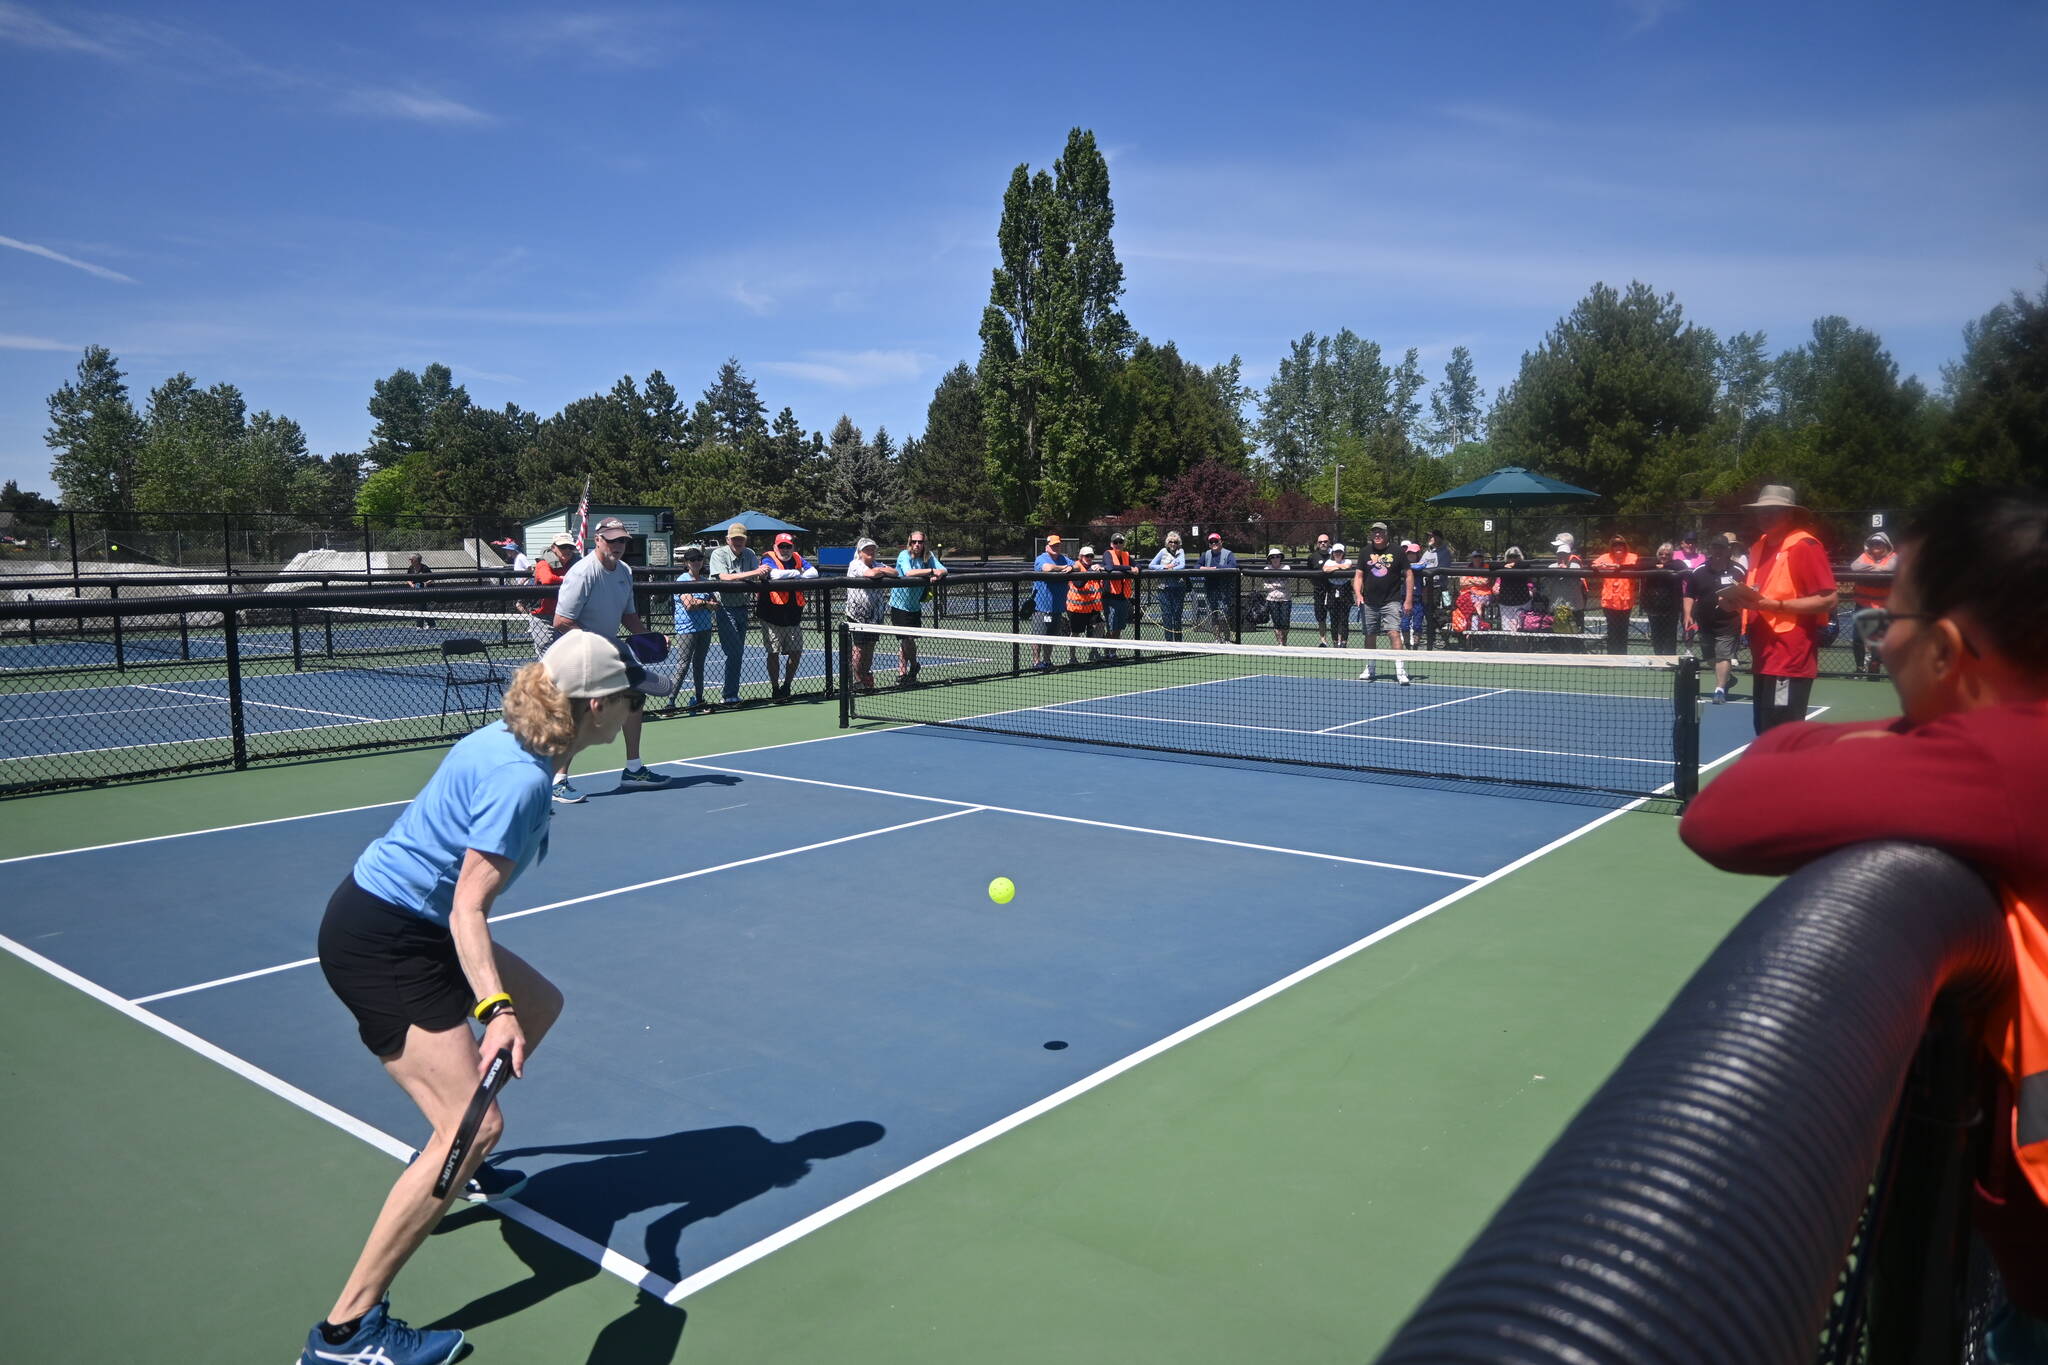 Sequim Gazette photos by Michael Dashiell
A crowd looks on as Abigail Berg returns a serve in a semifinal match in the Big Dill Fun Day tournament on May 20.